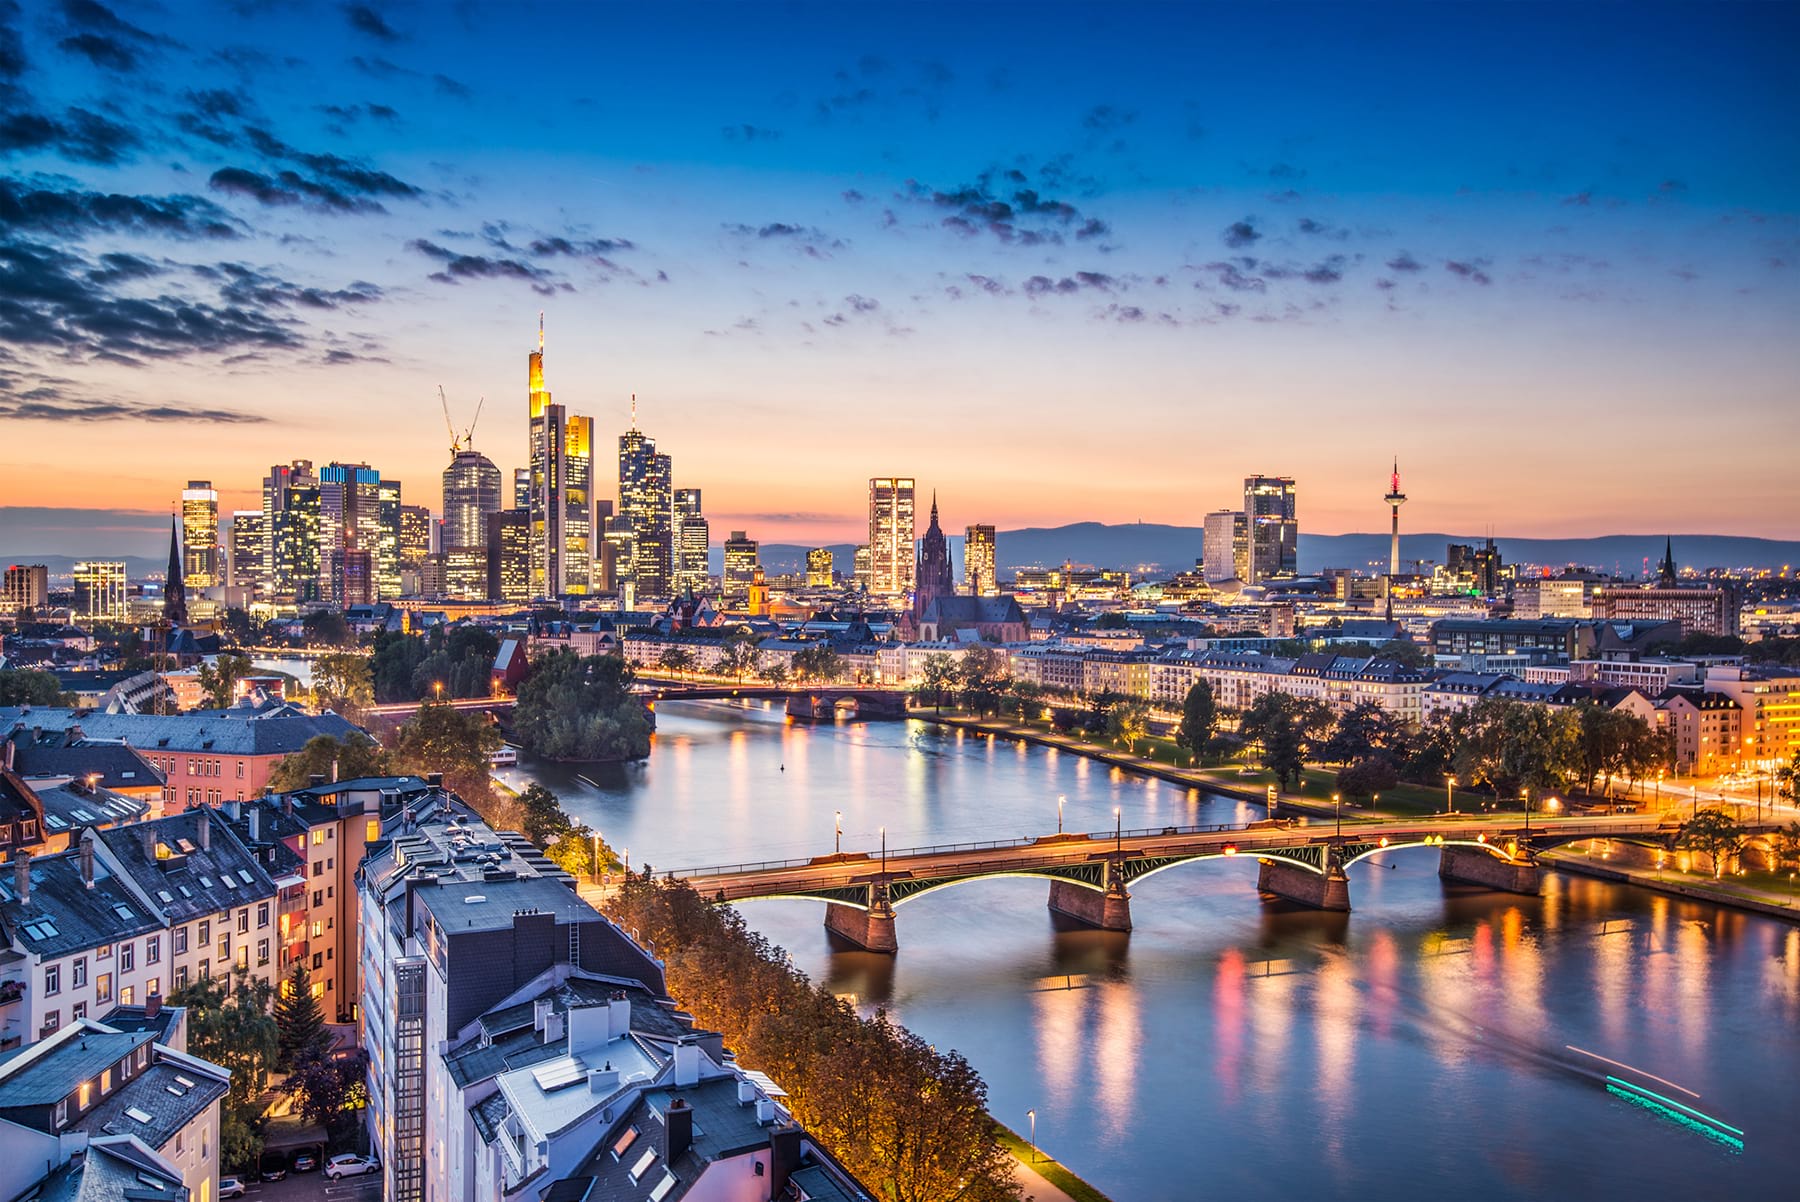 Frankfurt boasts 15 museums for visitors to discover. © Getty Images - iStockphoto